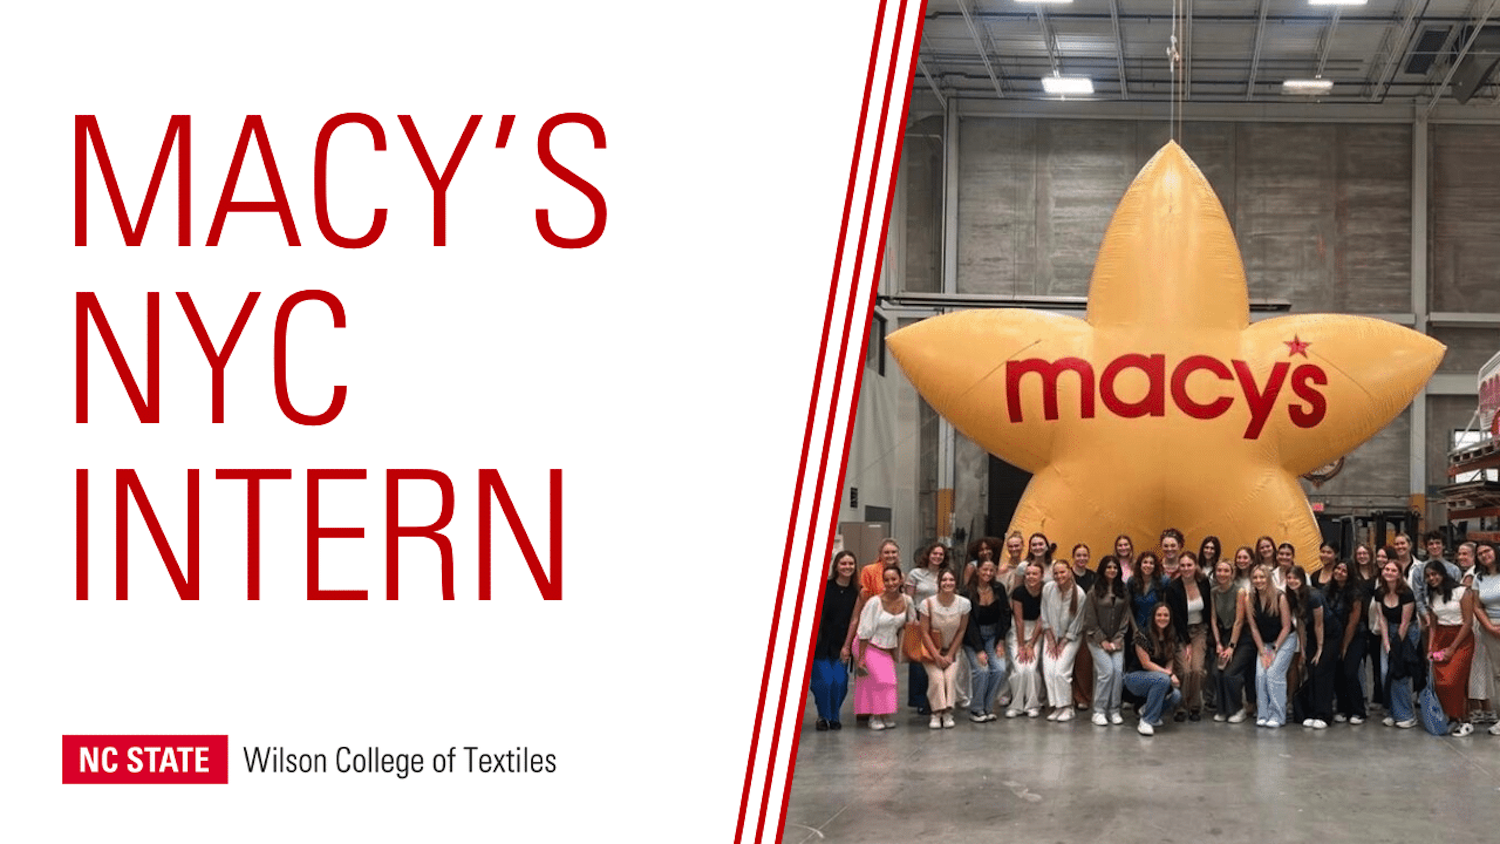 Macy's NYC Intern infographic with photo of interns in front of a Macy's star parade balloon.